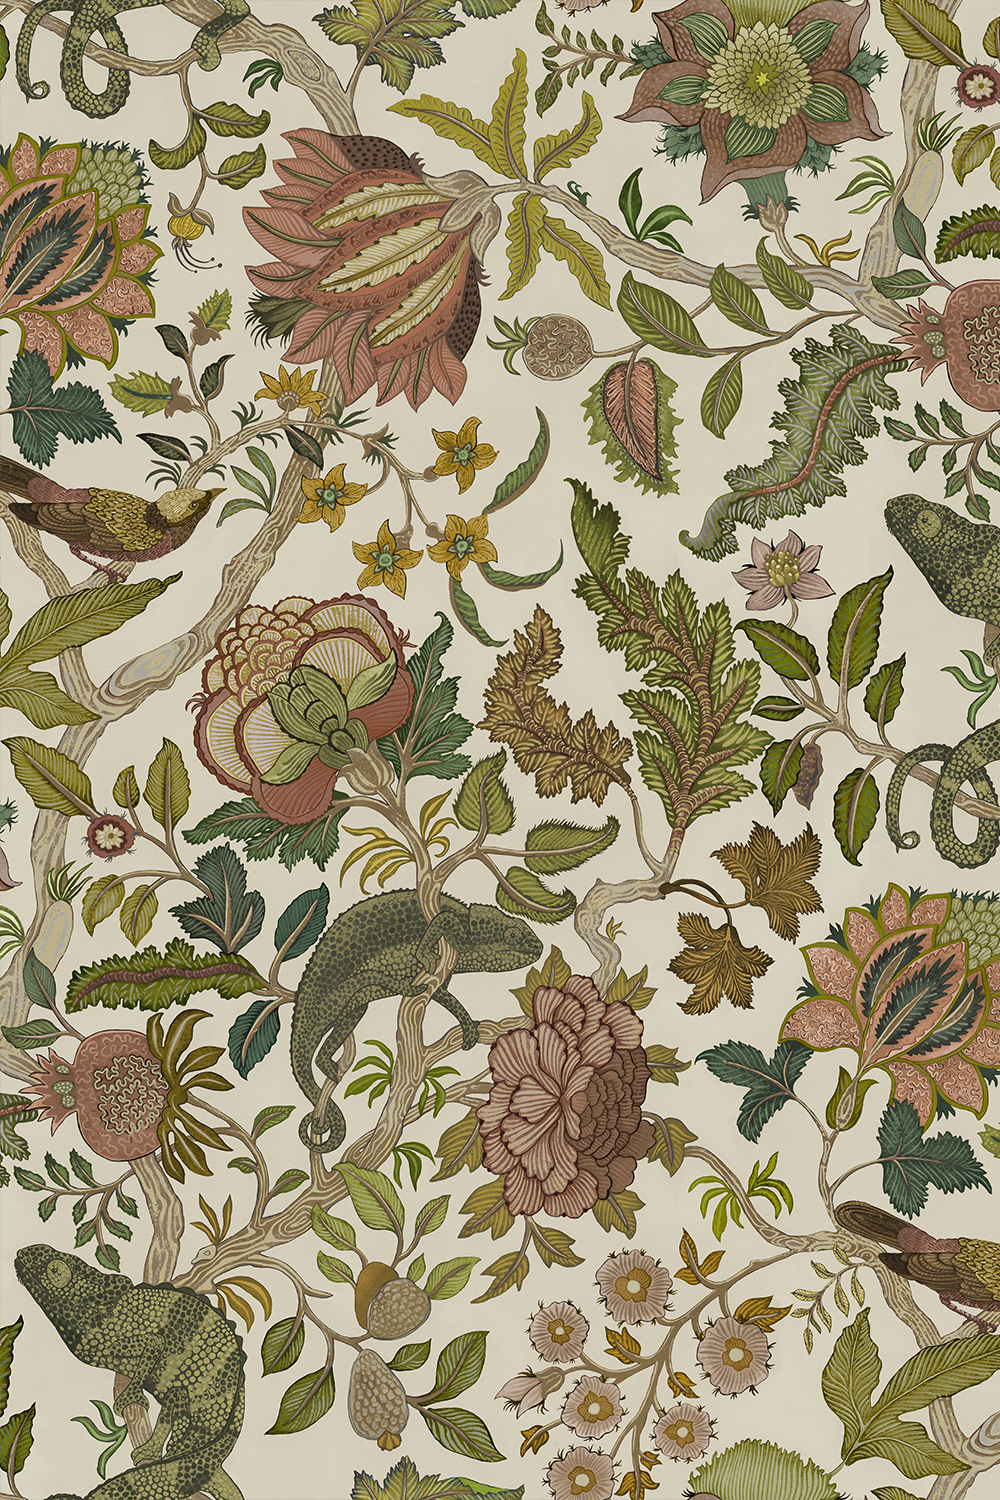 Chameleon Trail Wallpaper - Dusty Pinks and Olive